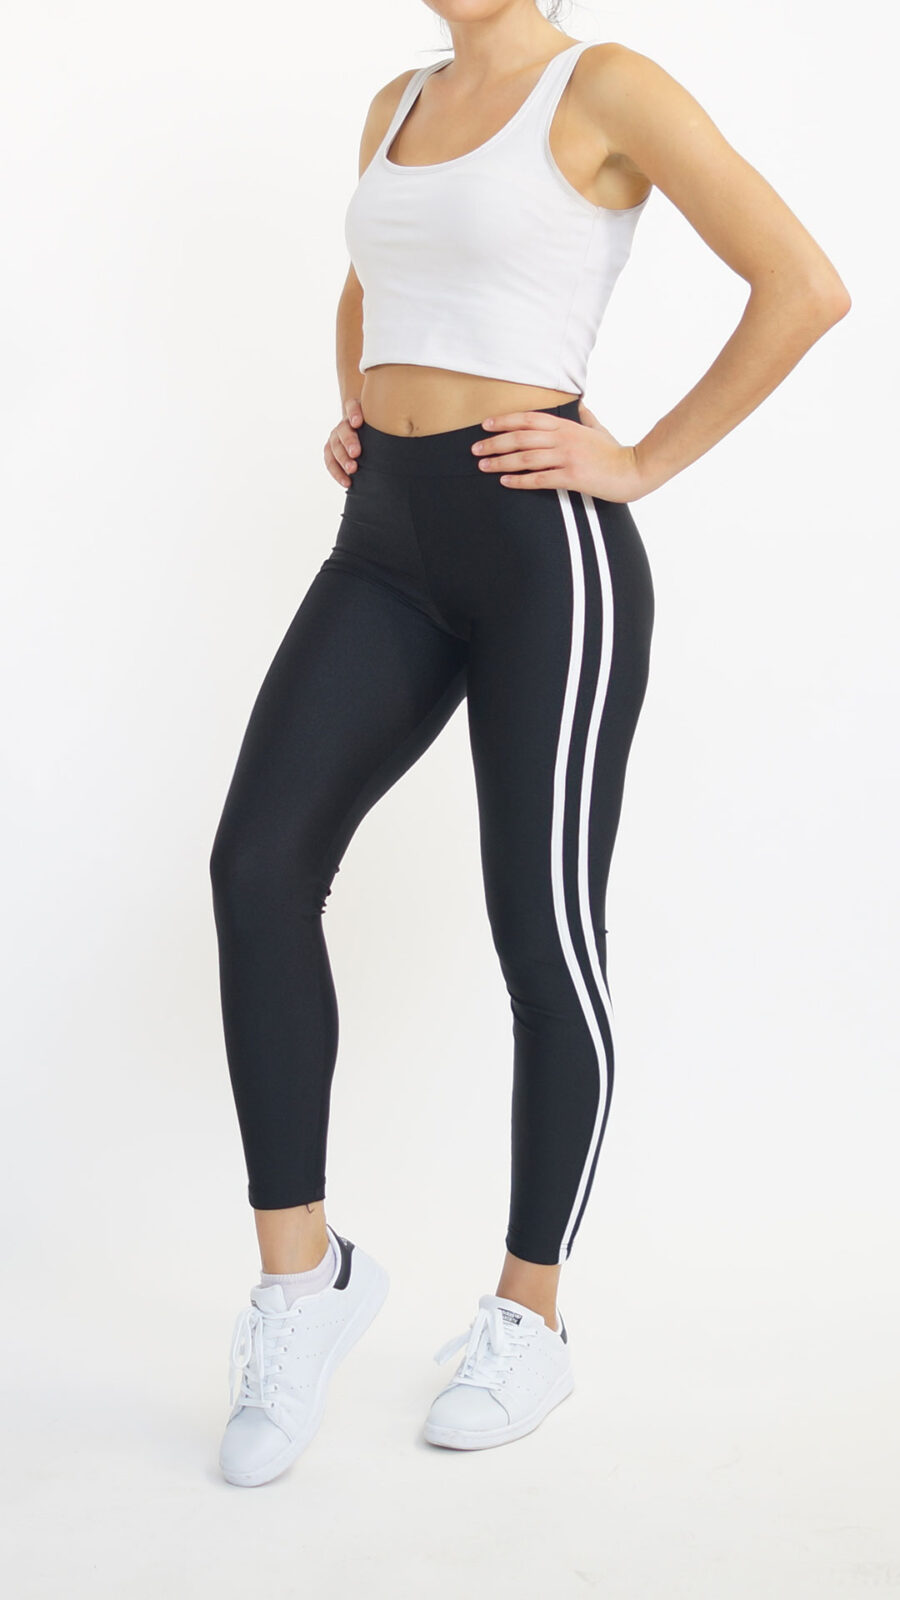 Black Leggings with White Side Stripe by Electric Yoga S | Active Wear  501499 | eBay